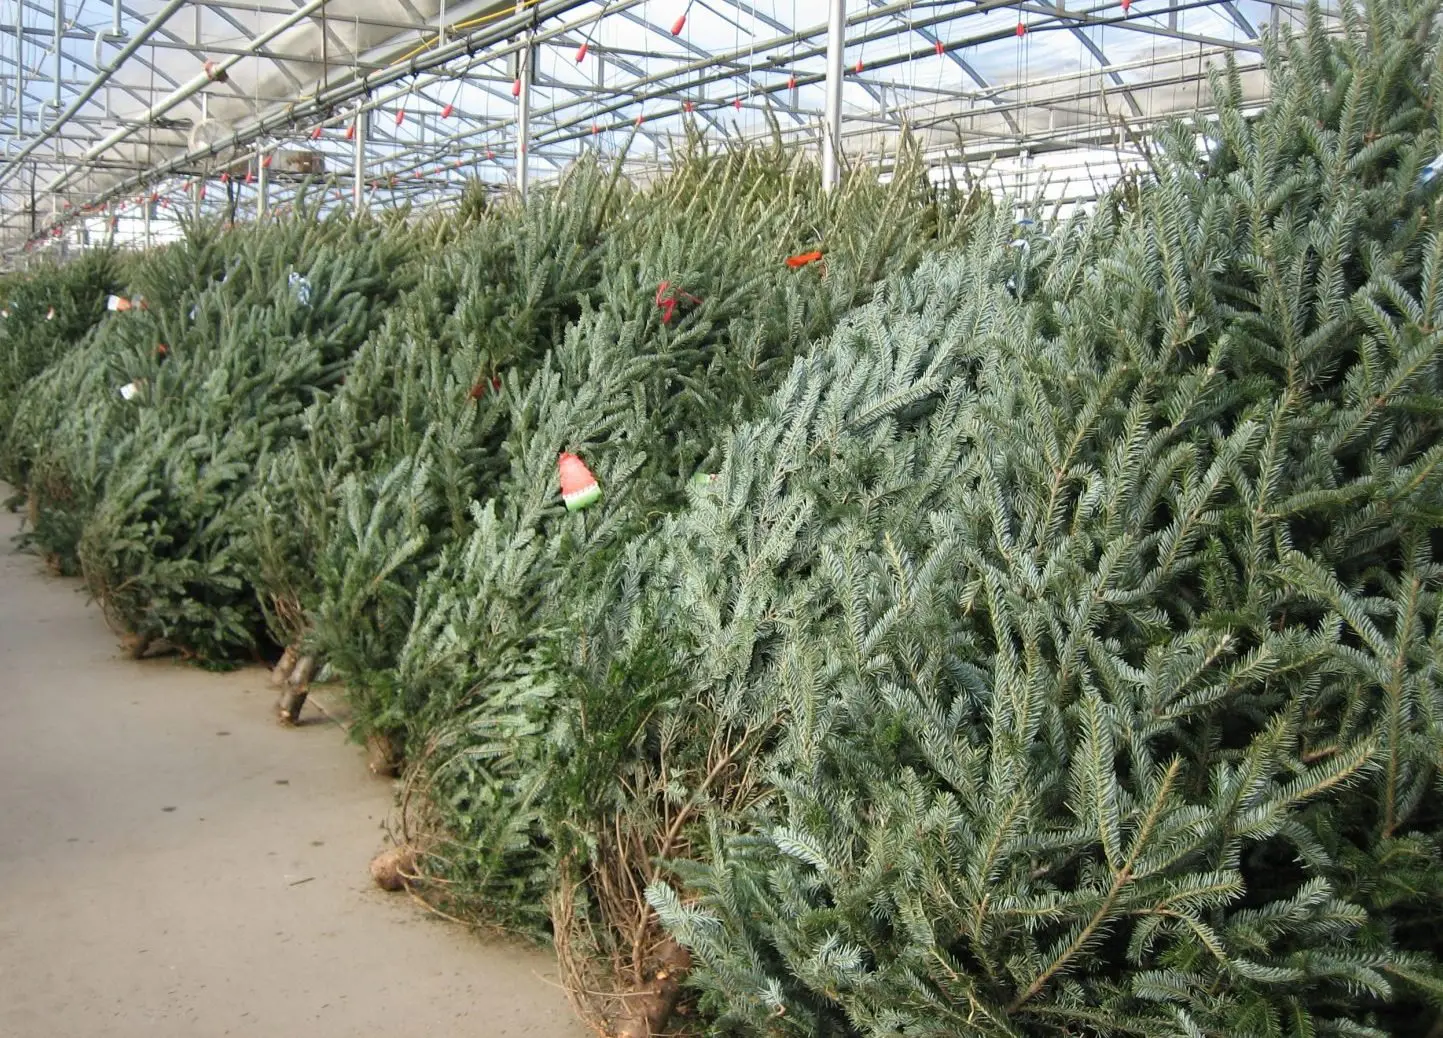 Picking the Perfect Christmas Tree